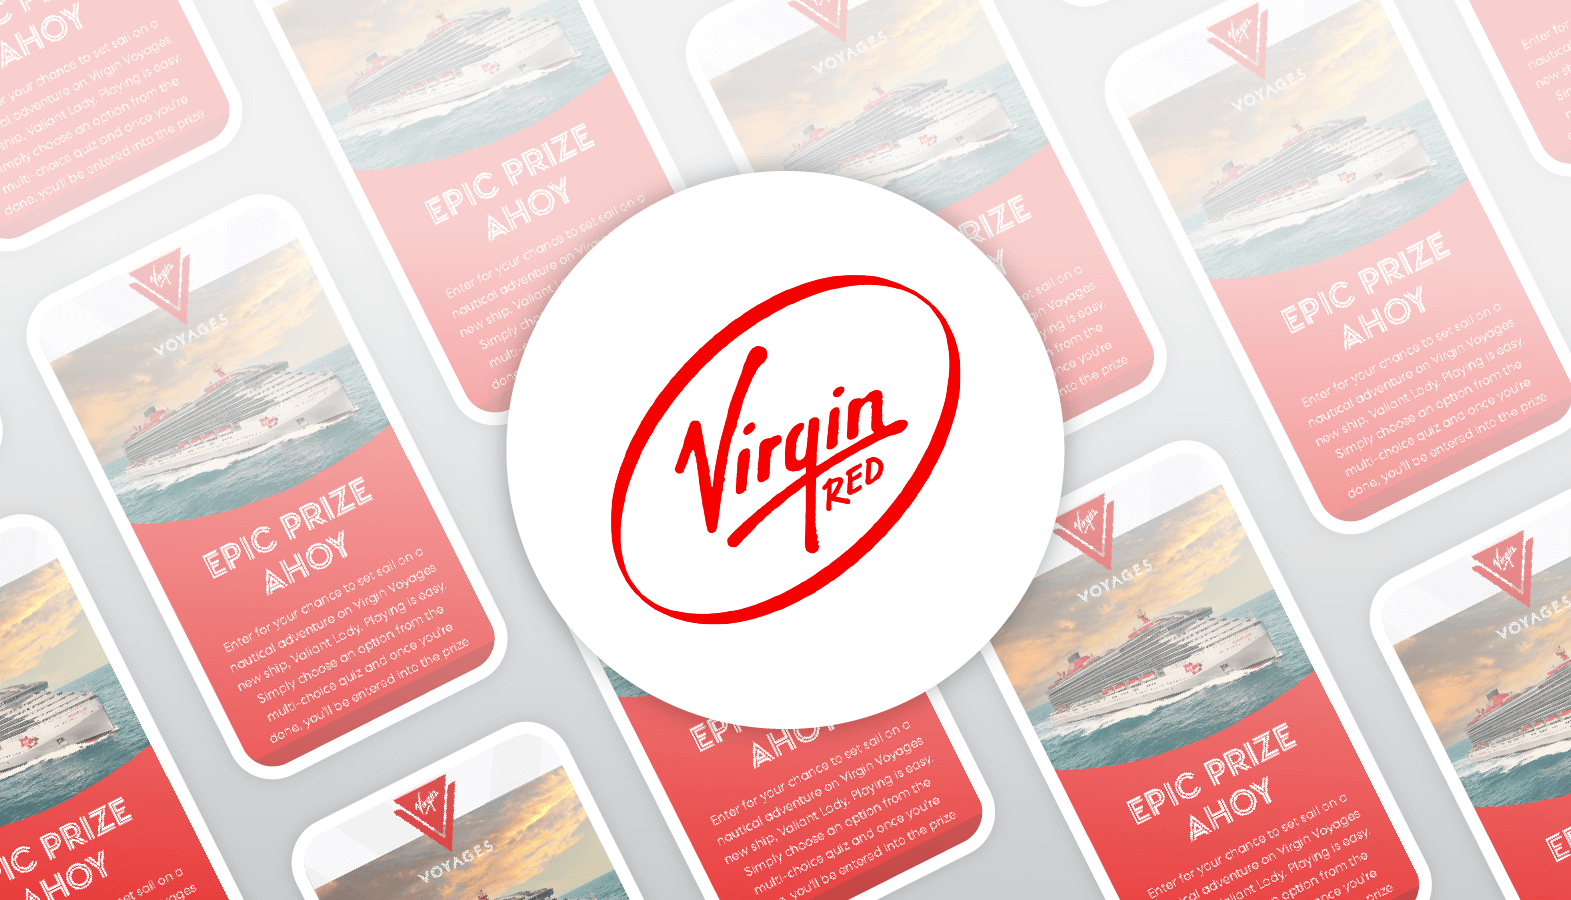 Virgin Red Customer Story with Playable